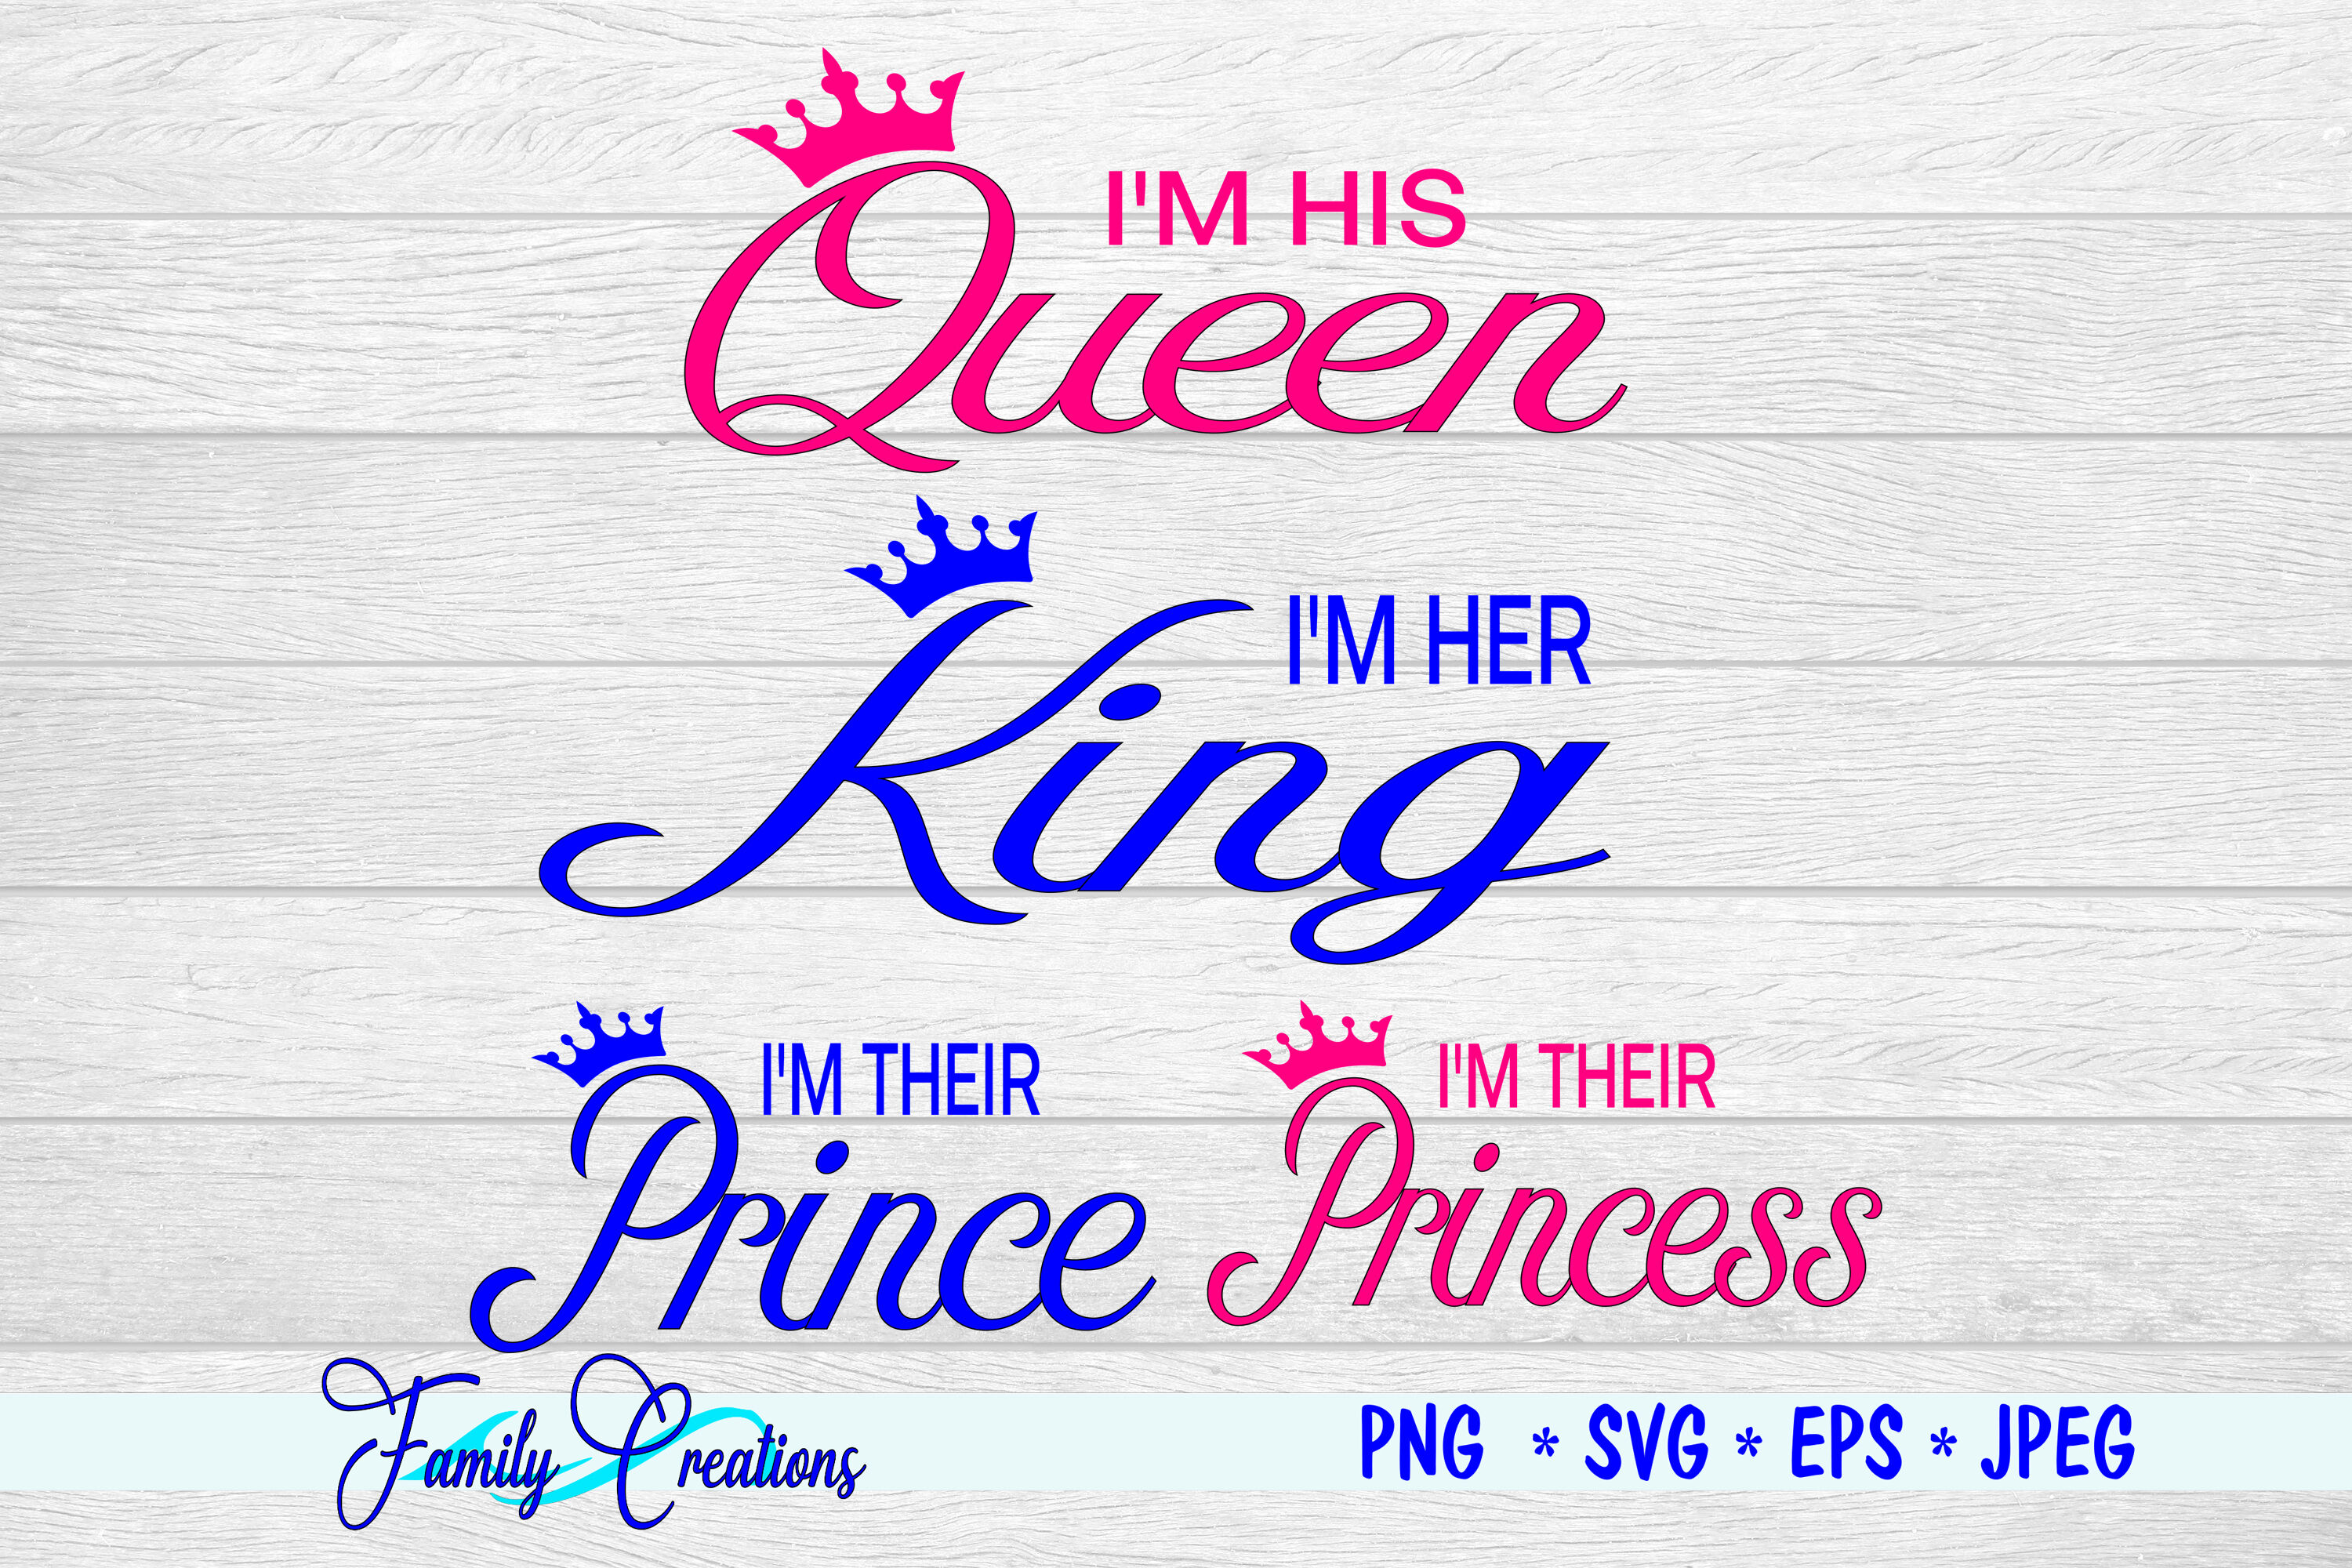 Download I M His Queen I M Her King I M Their Prince And Princess By Family Creations Thehungryjpeg Com